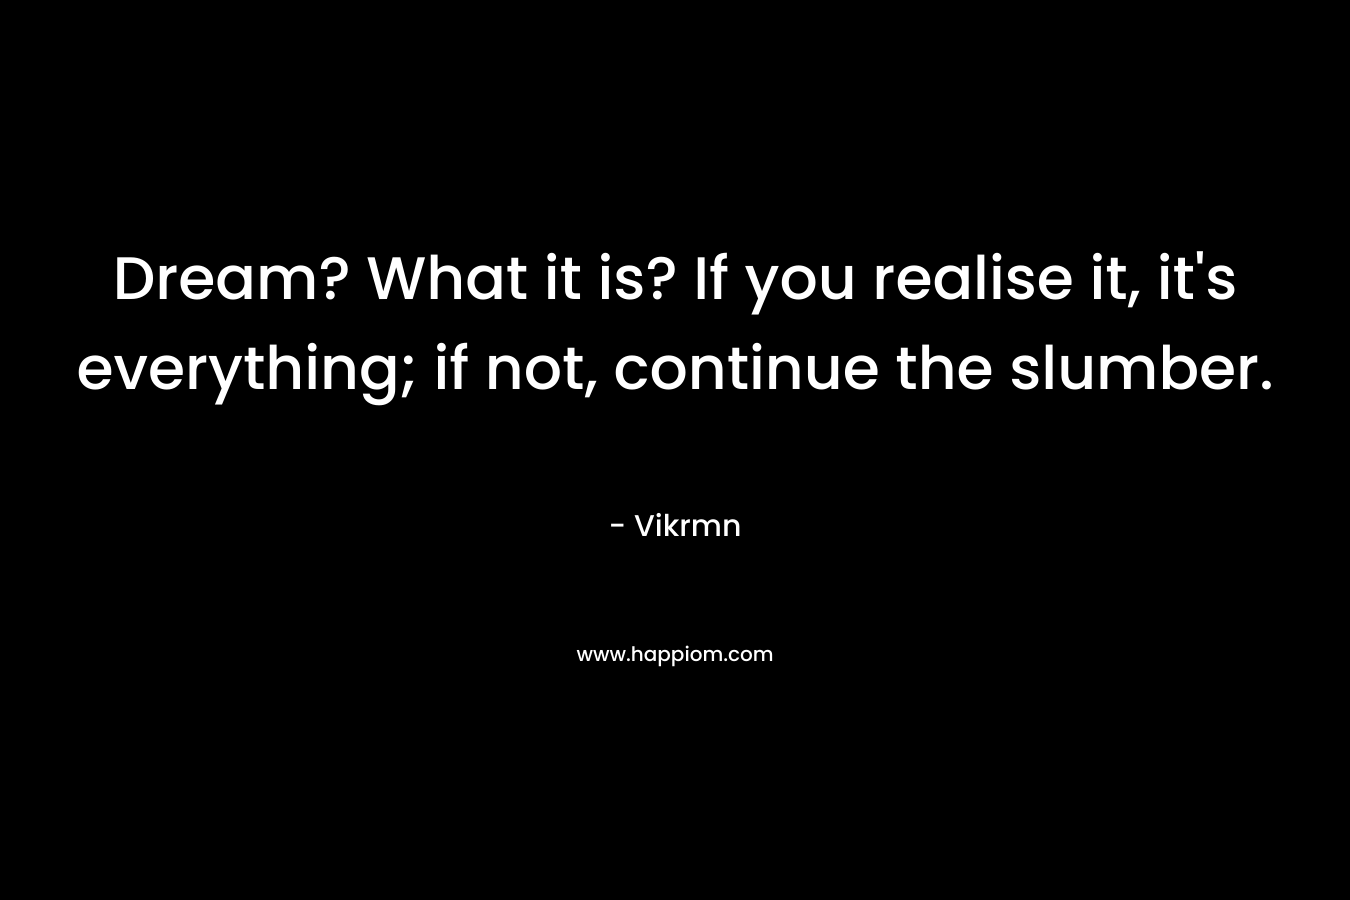 Dream? What it is? If you realise it, it's everything; if not, continue the slumber.